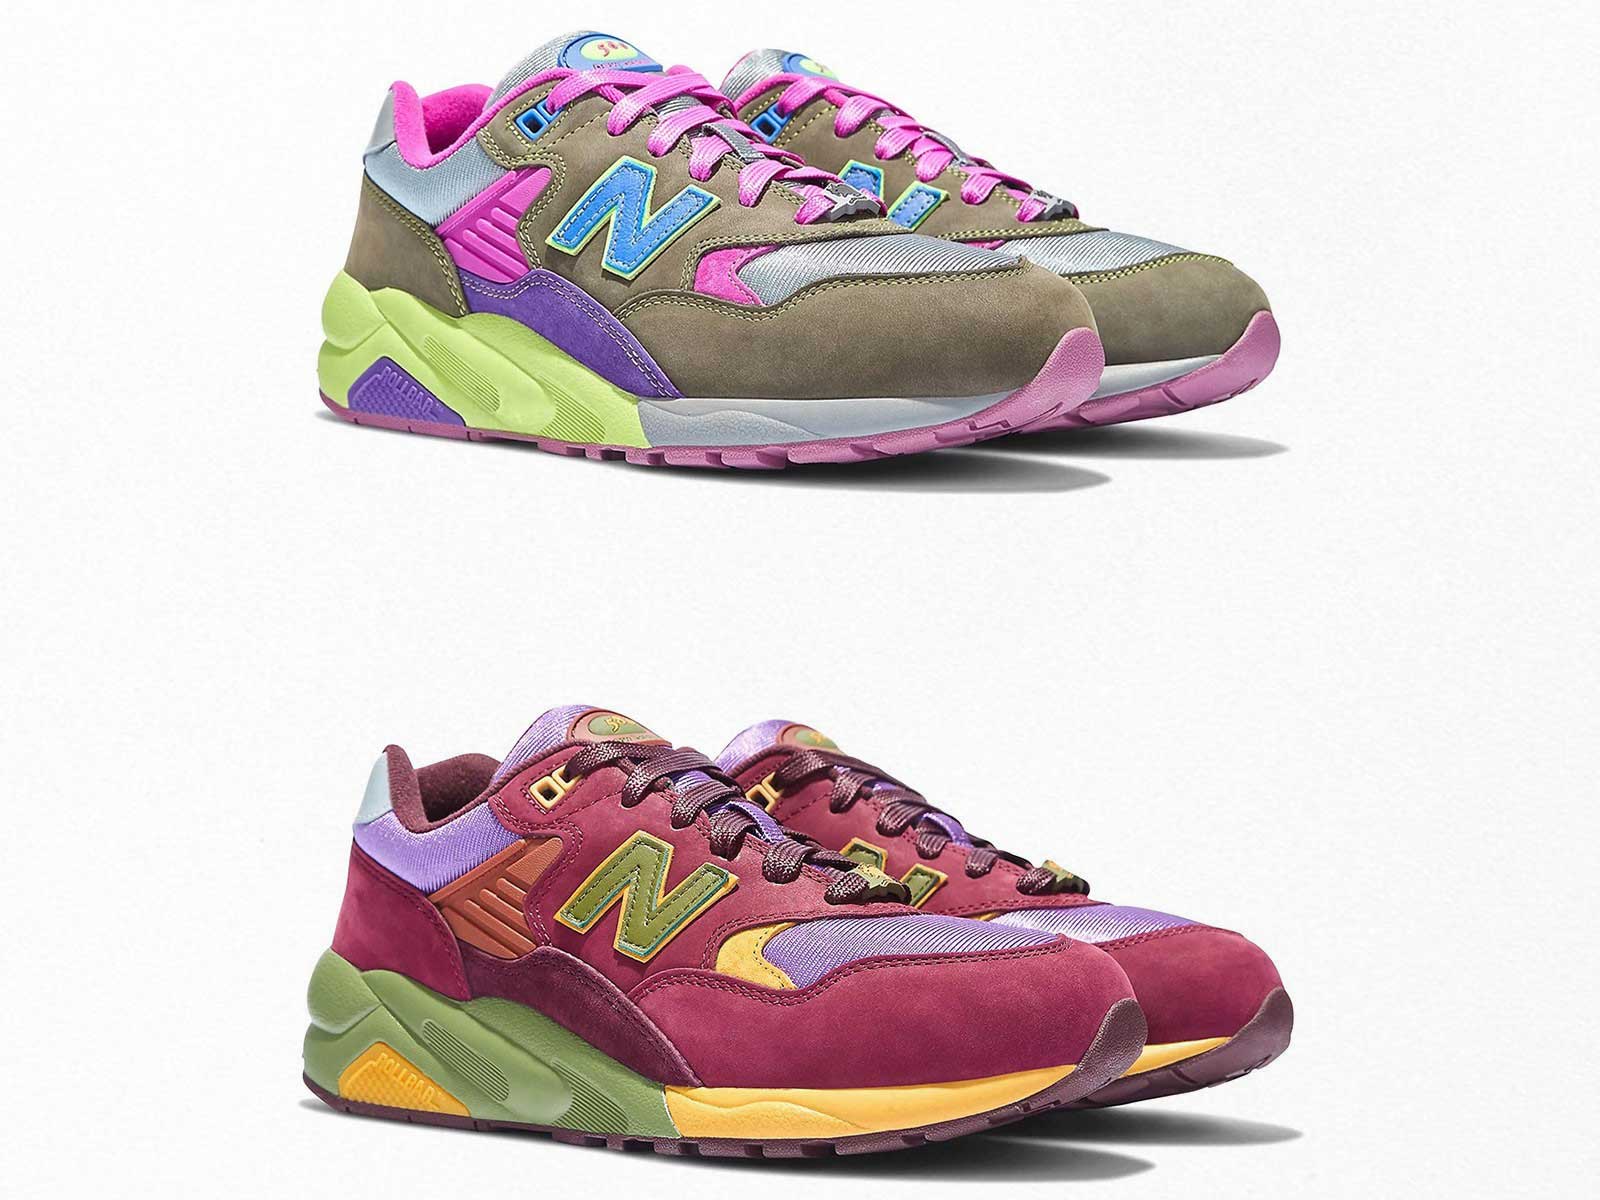 Stray Rats and New Balance unleash multicolor madness